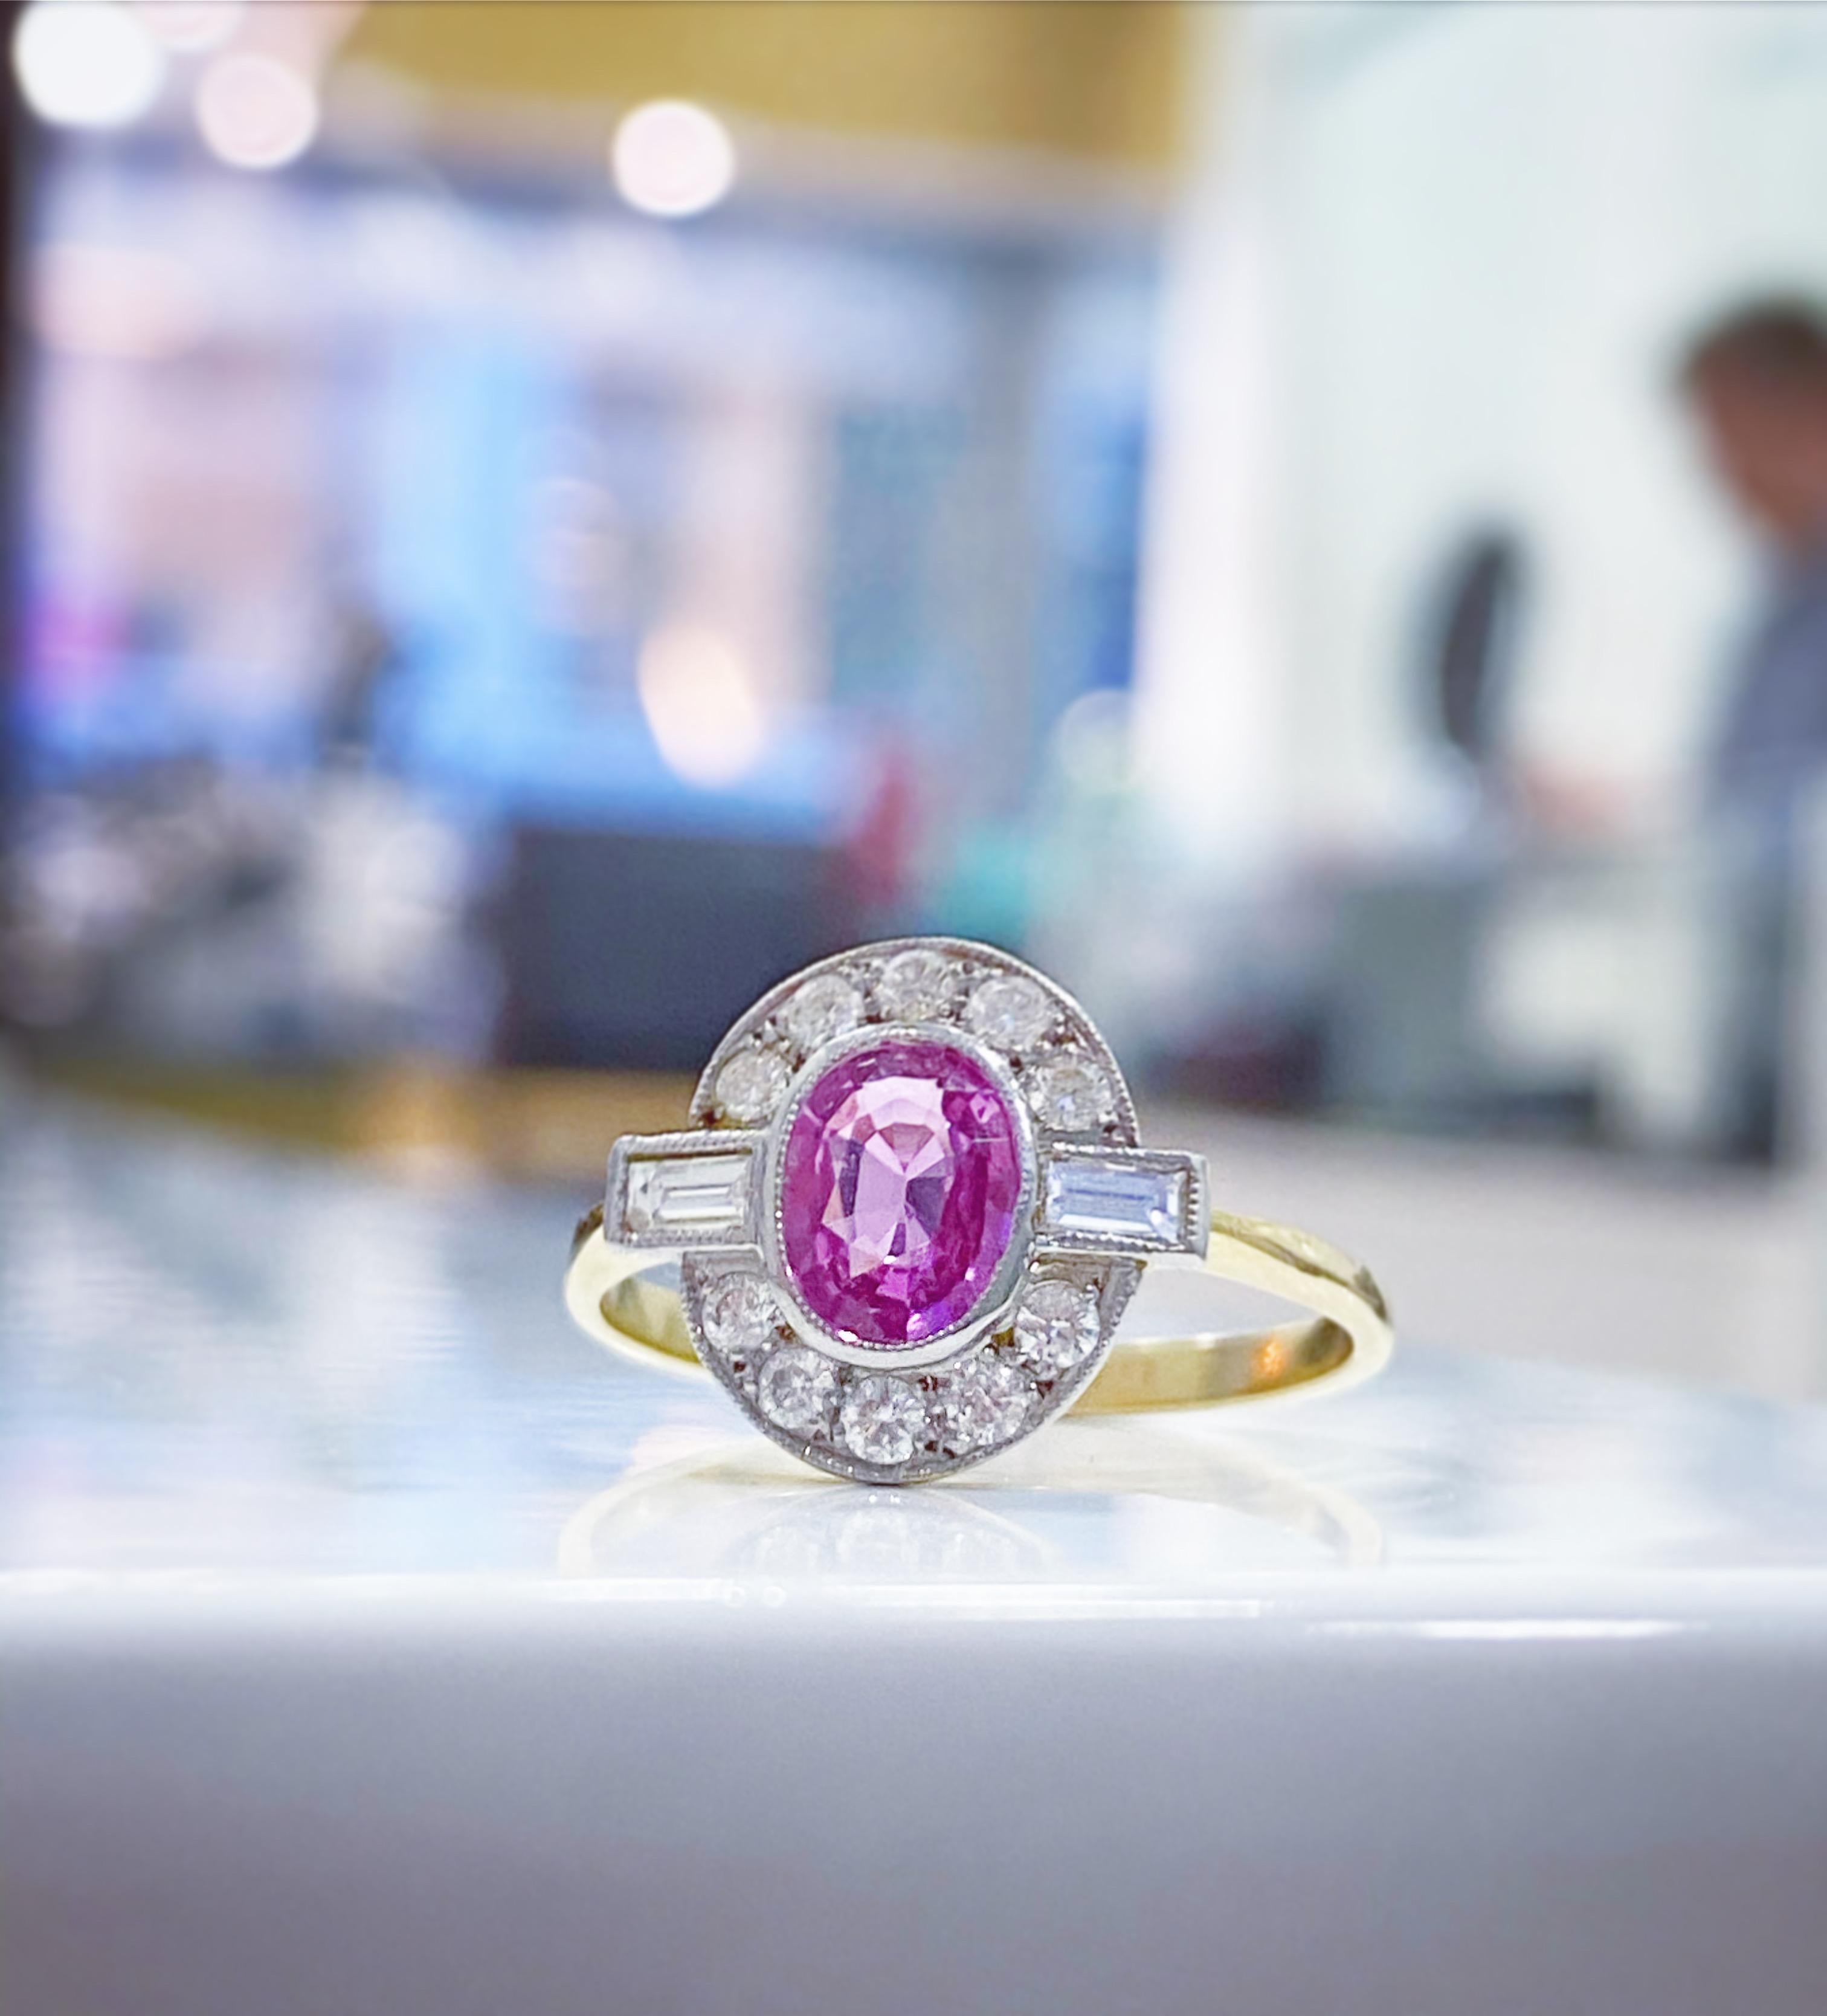 Women's or Men's Vintage 0.75 Carat Pink Sapphire and Diamond Ring, circa 1950s For Sale